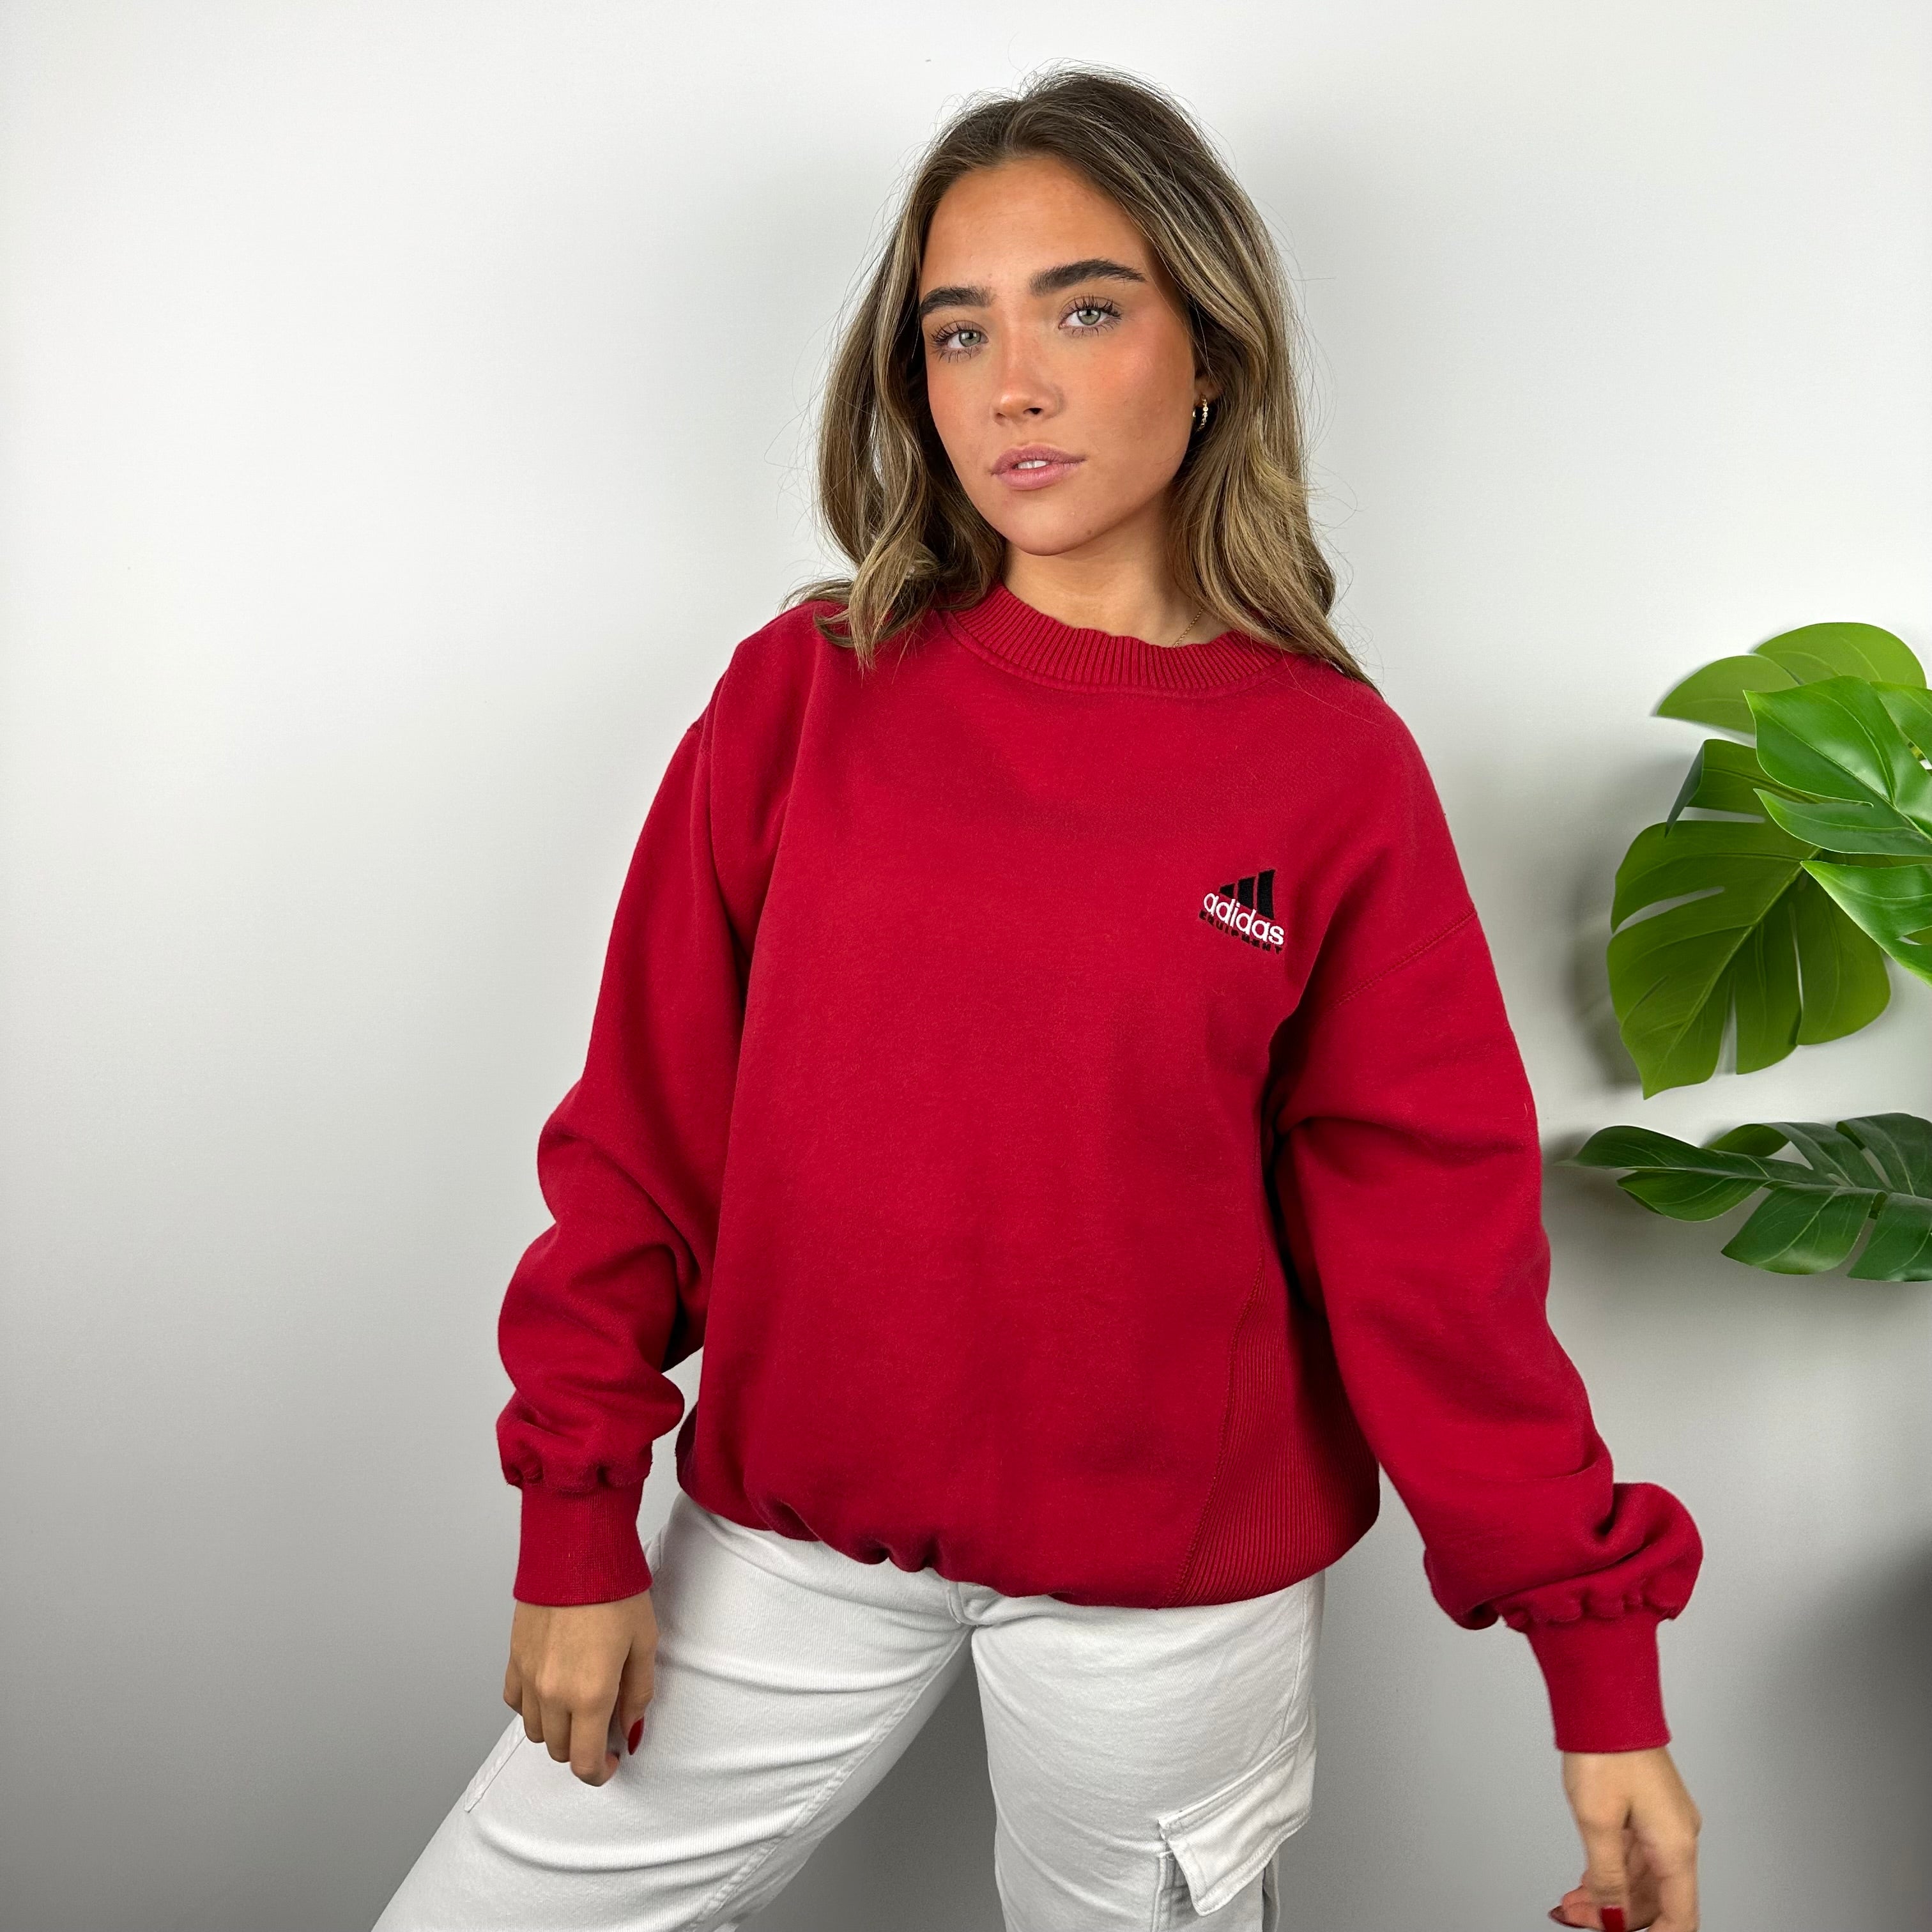 Adidas Equipment RARE Red Embroidered Spell Out Sweatshirt (L)